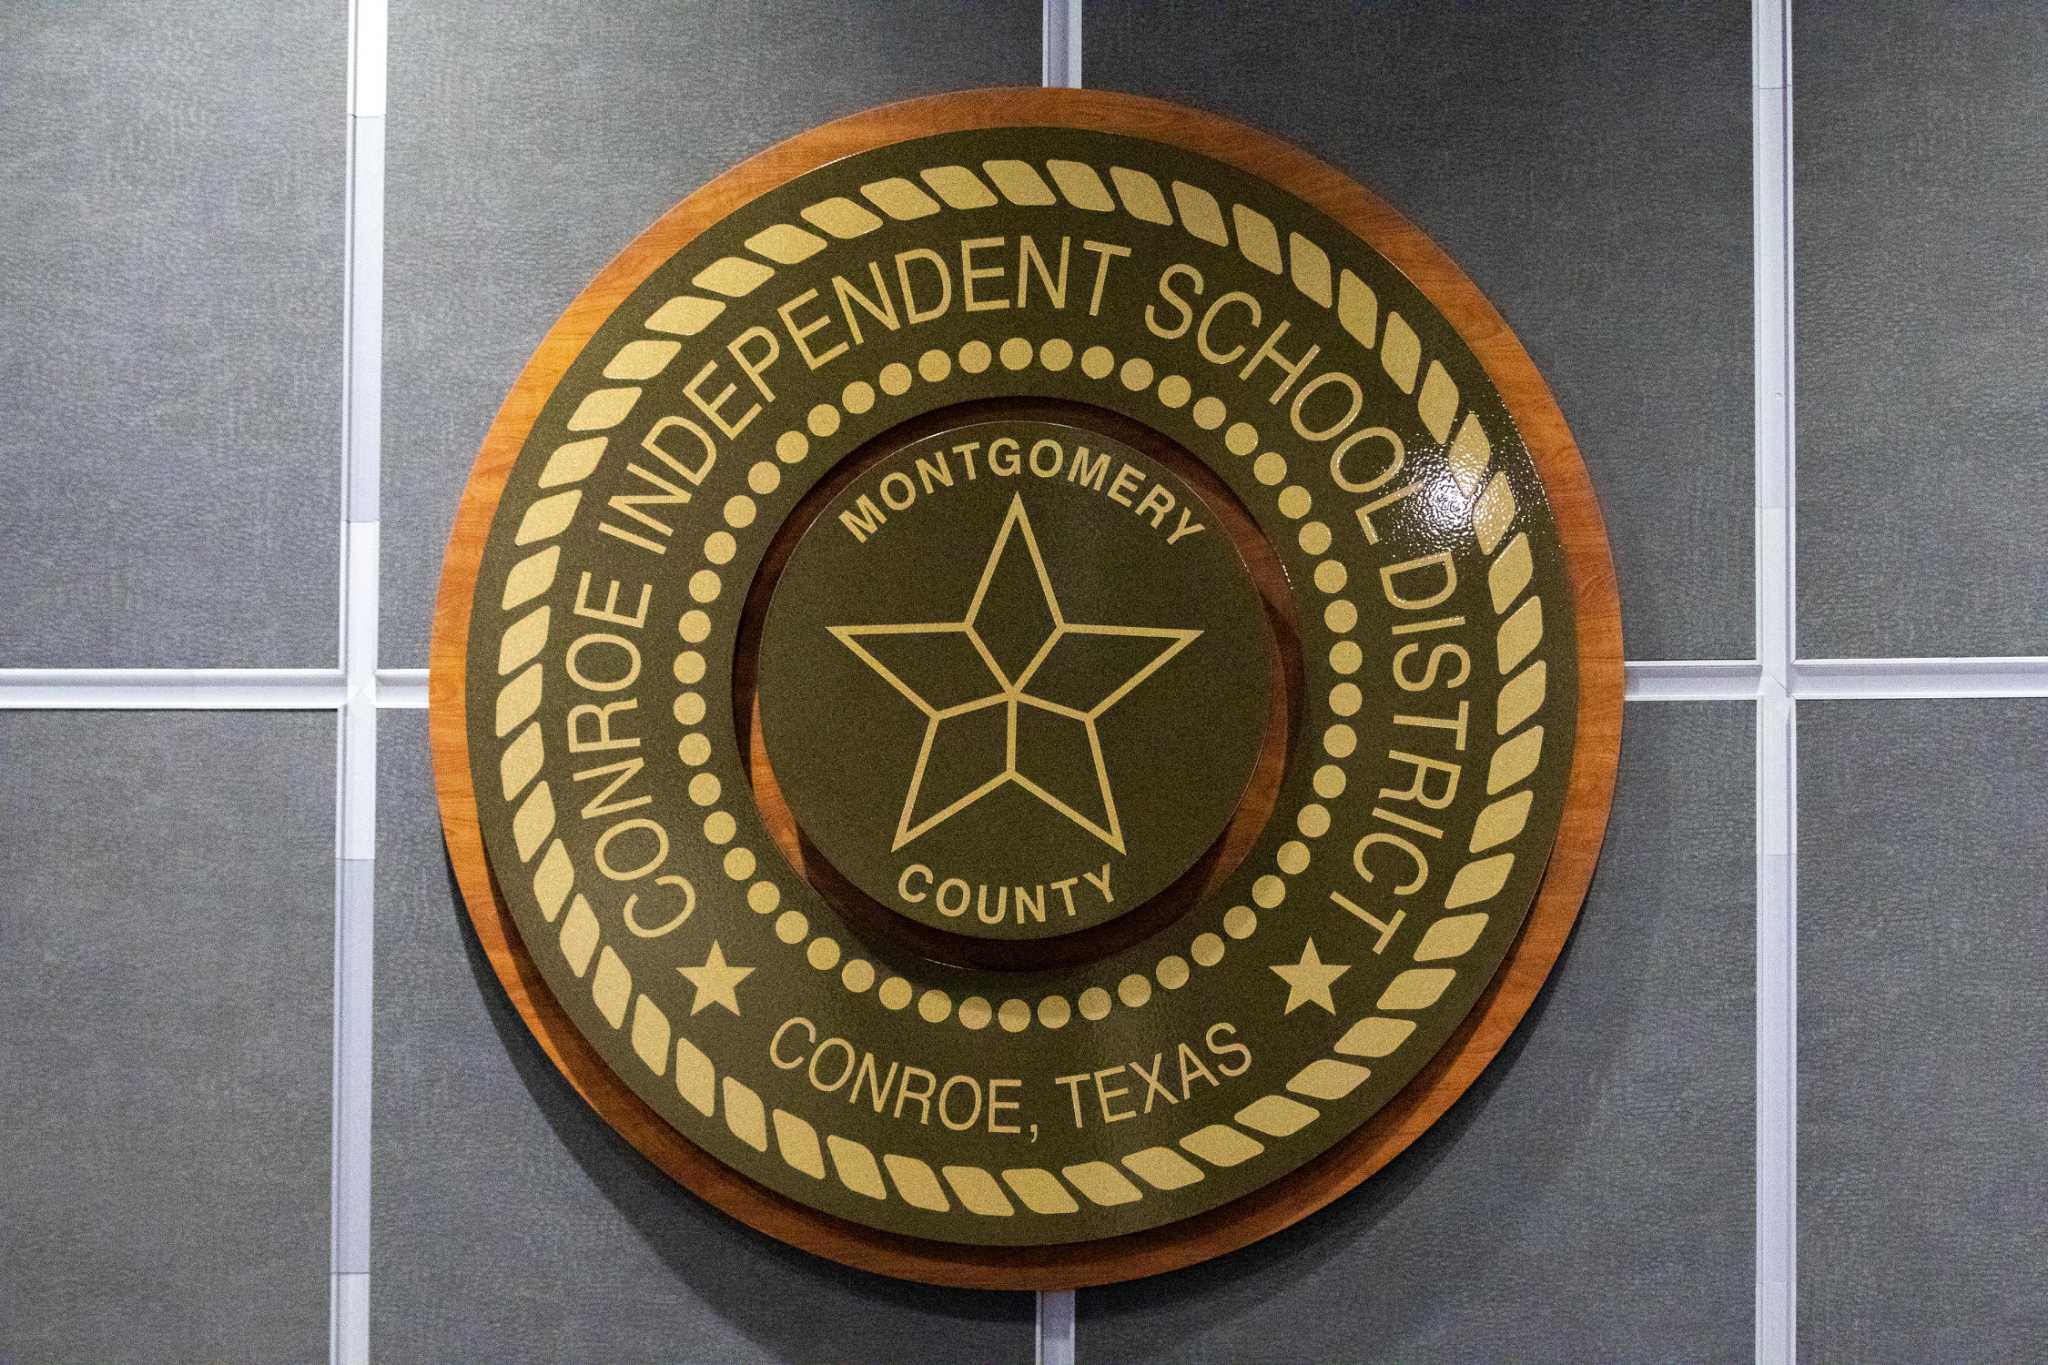 Conroe ISD trustees set budget of $549.5 million, lower tax rate even more for tax bill relief after calls from community members